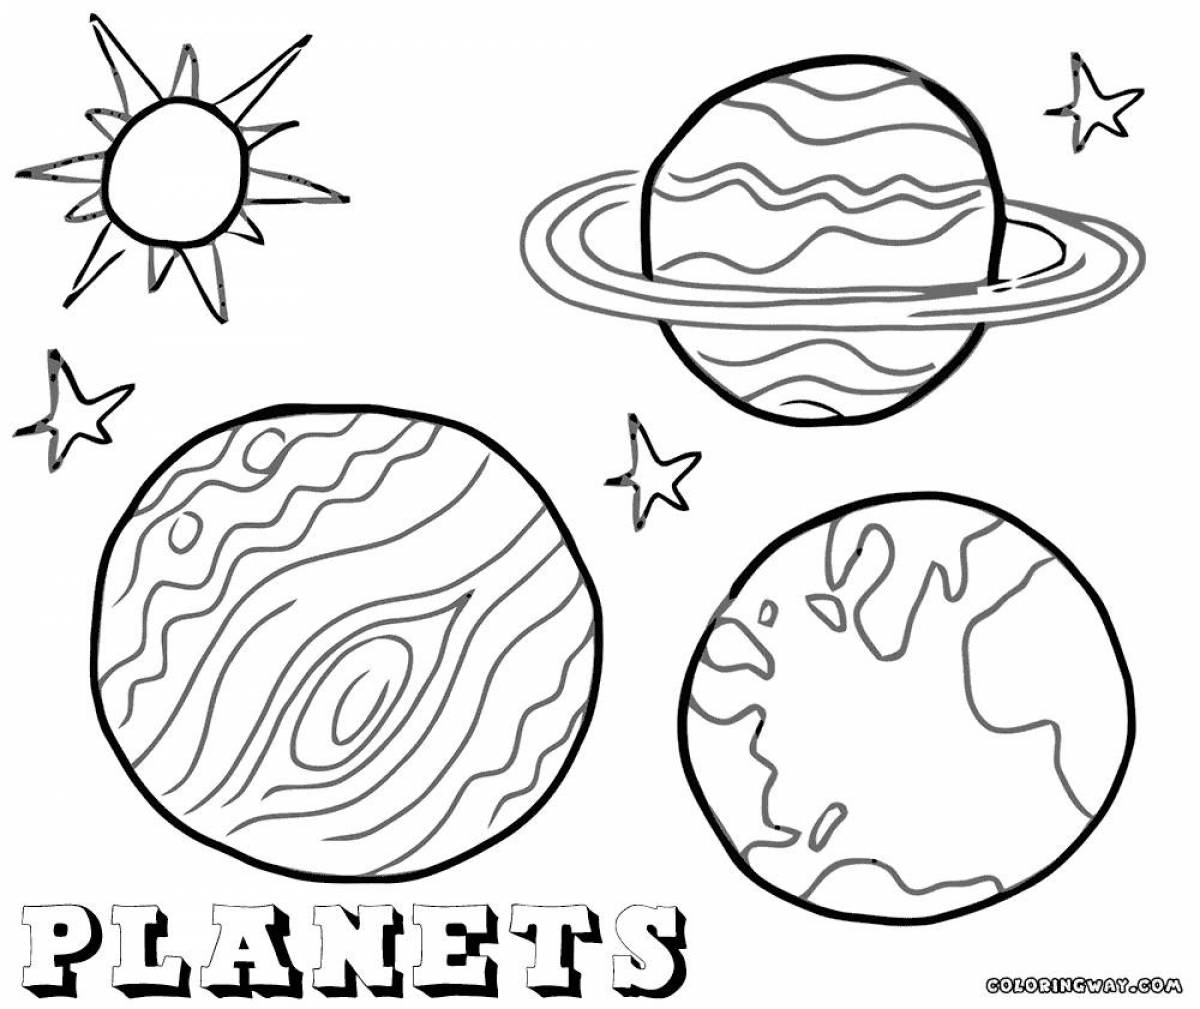 Planets for kids #5